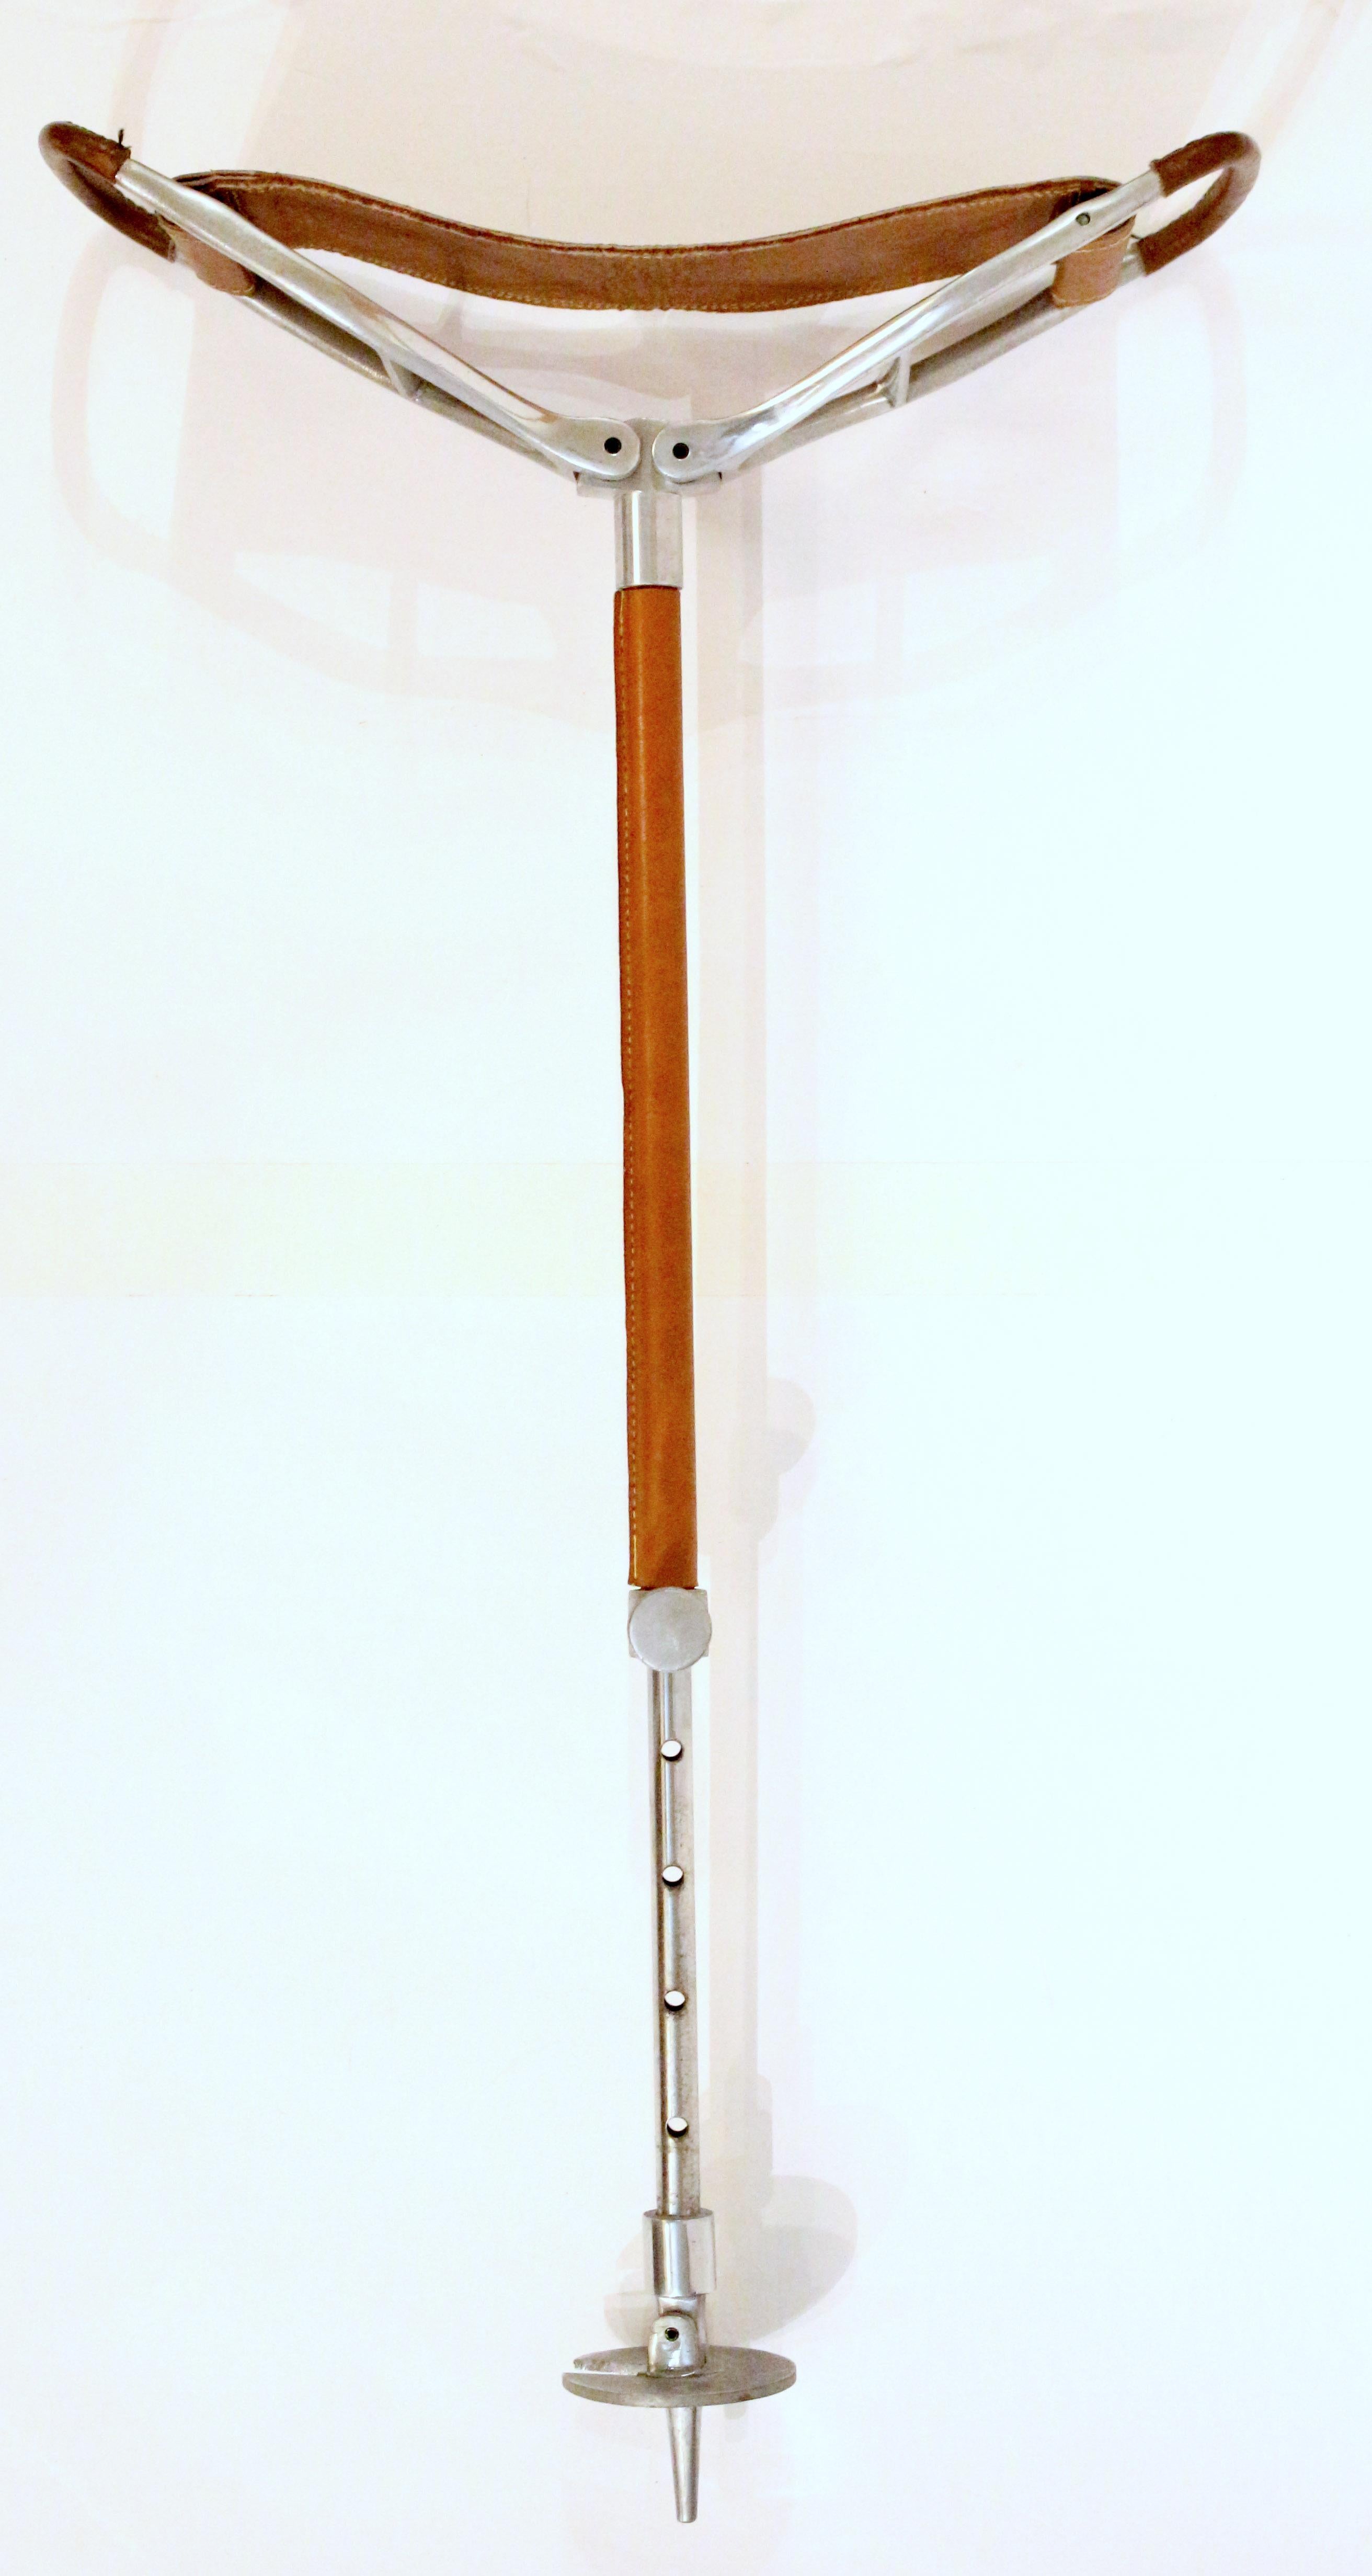 European Circa 1960 English Sporting Event or Hunting Walking Stick with Folding Seat